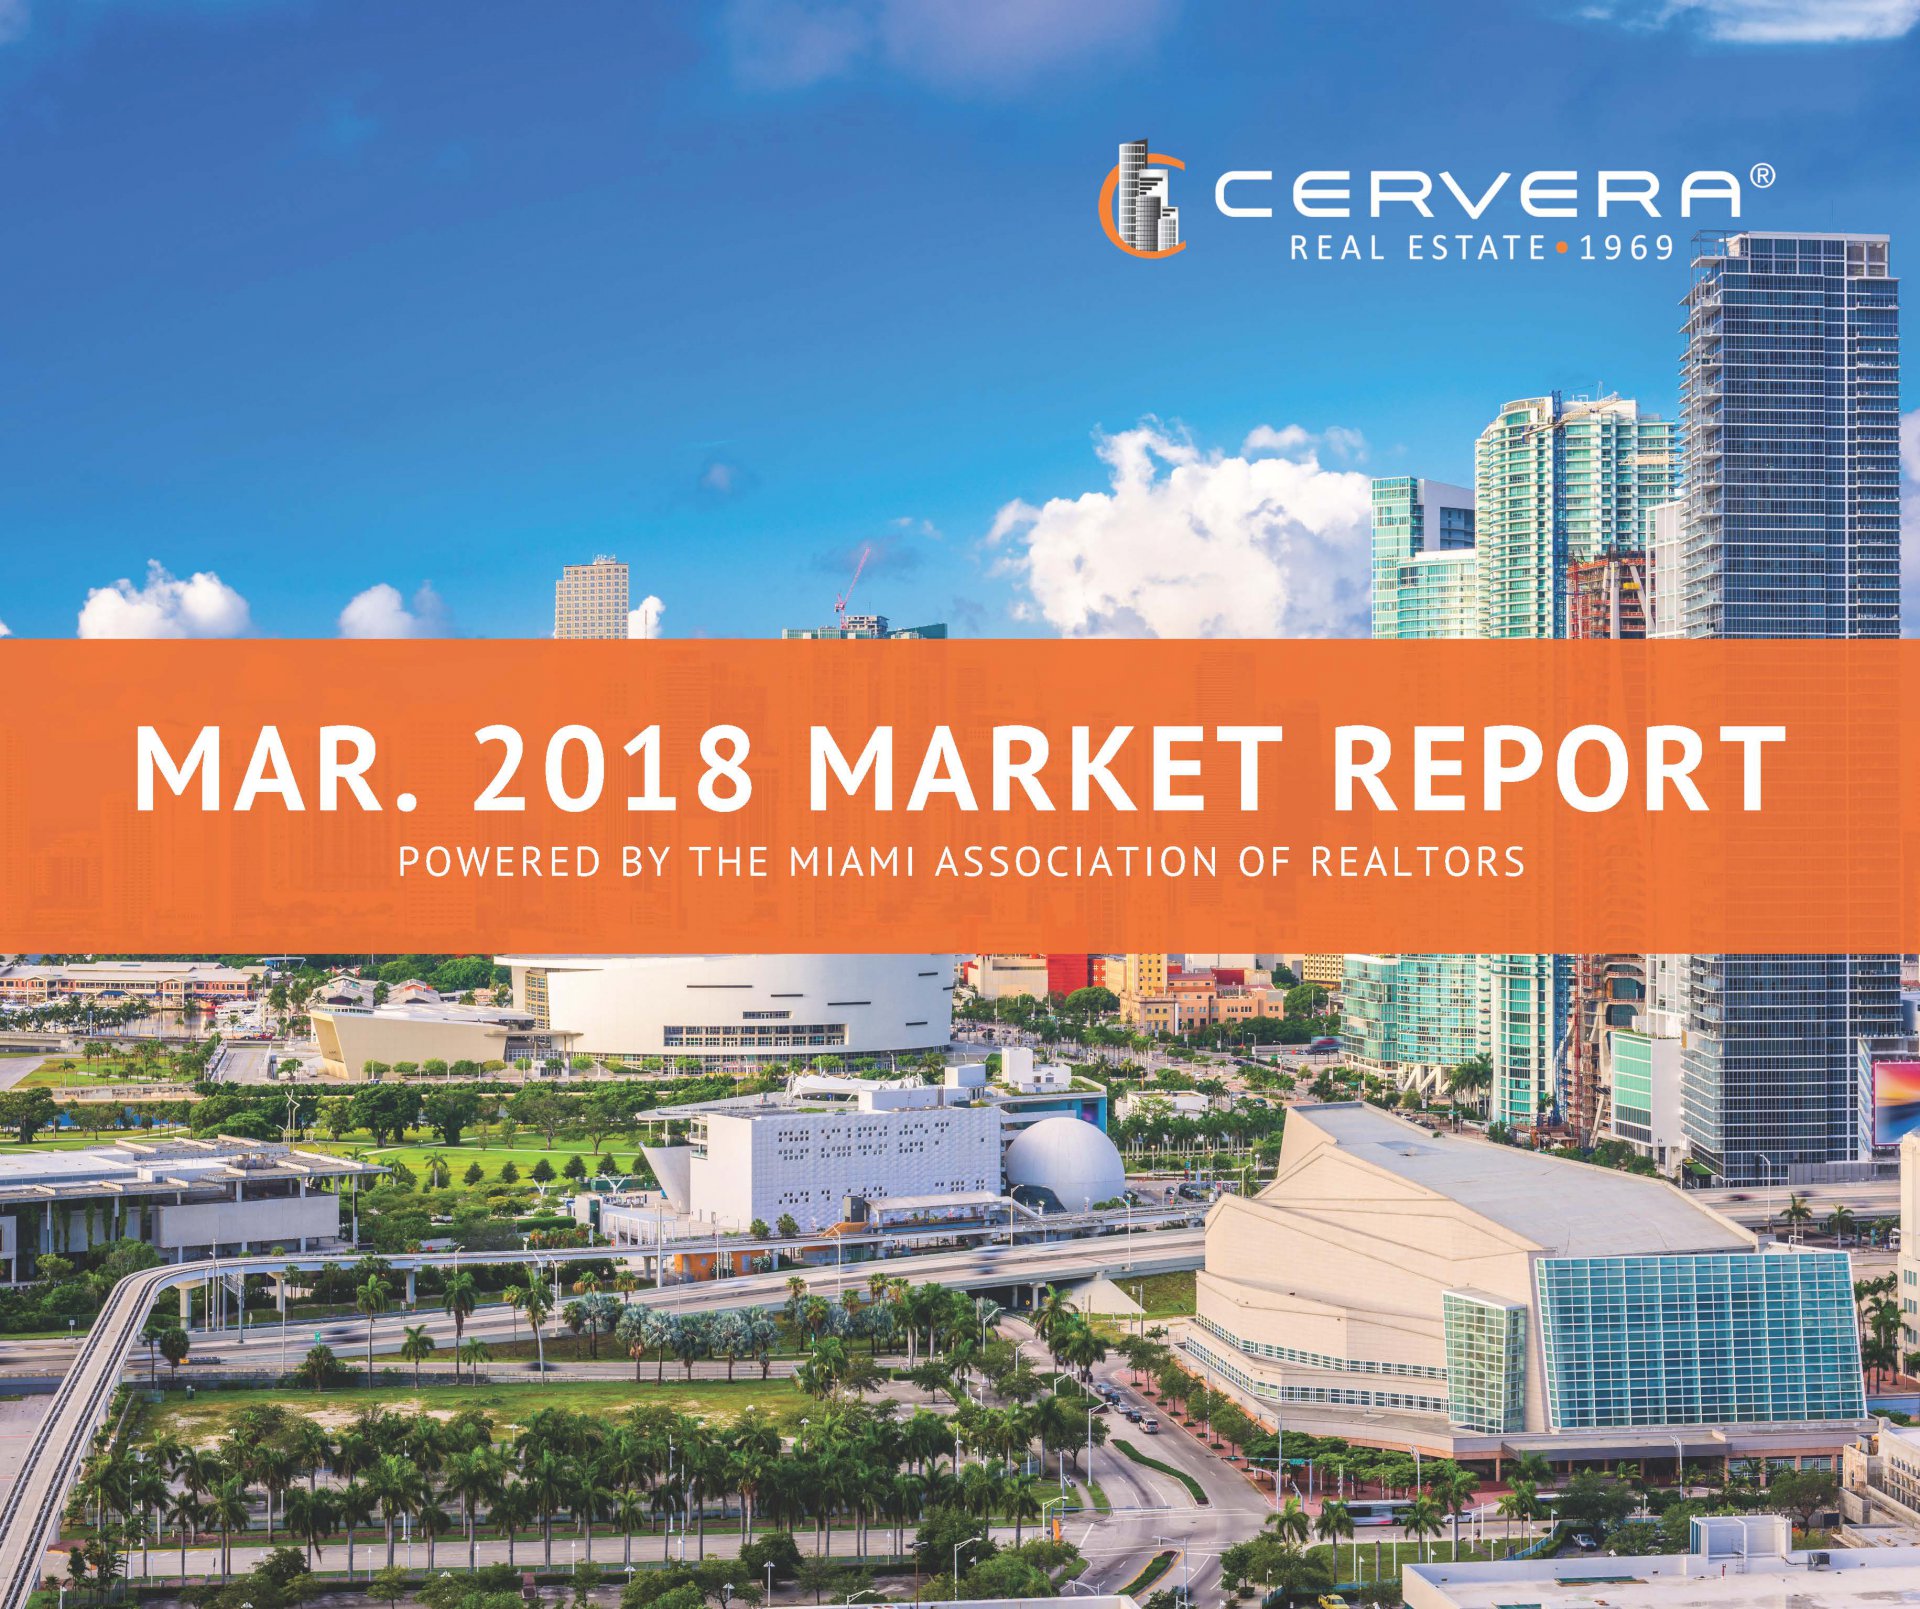 Mar. 2018 Market Report: Miami Luxury Single-Family Home Sales Jump in March